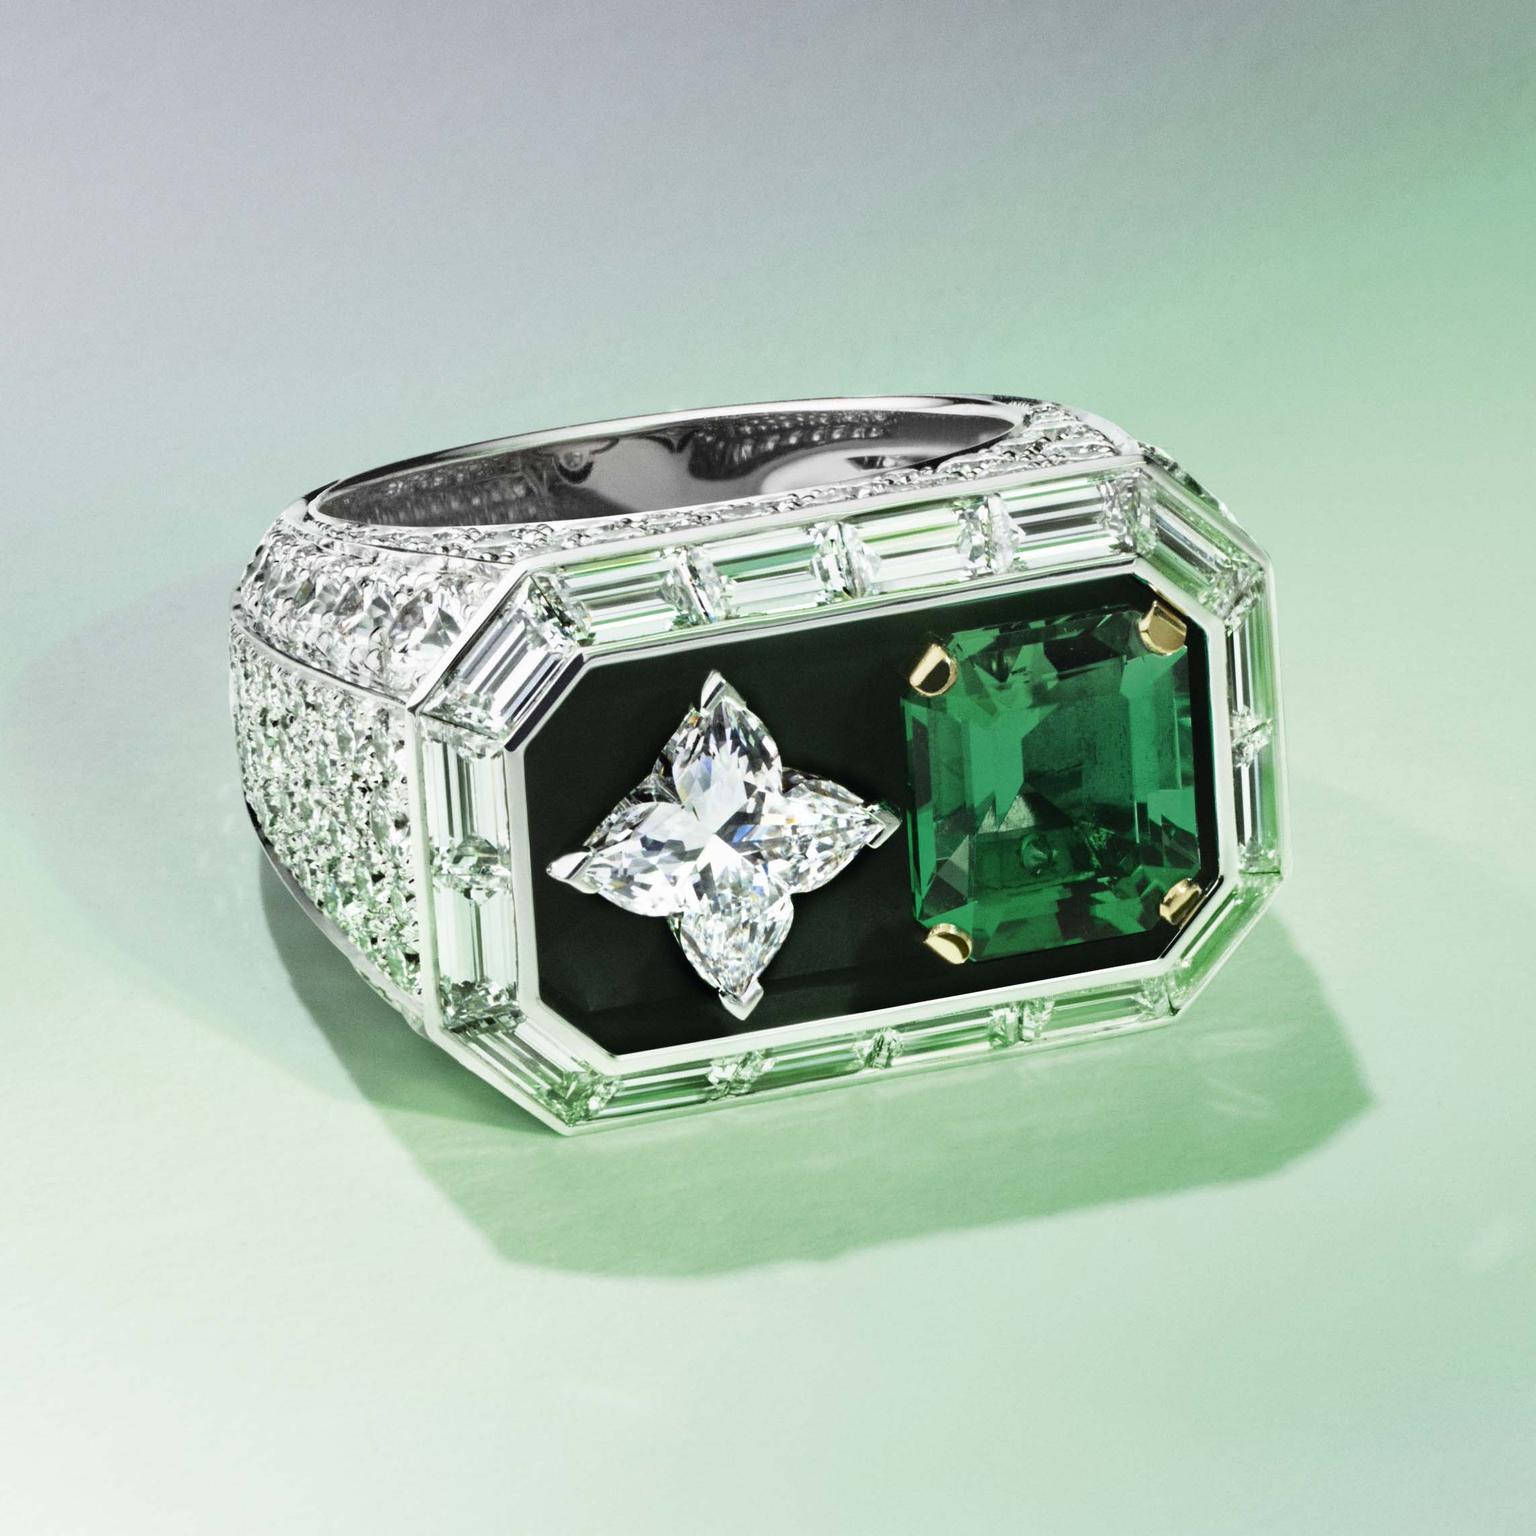 Louis Vuitton Riders of the Knights Le Royaume diamond and emerald ring